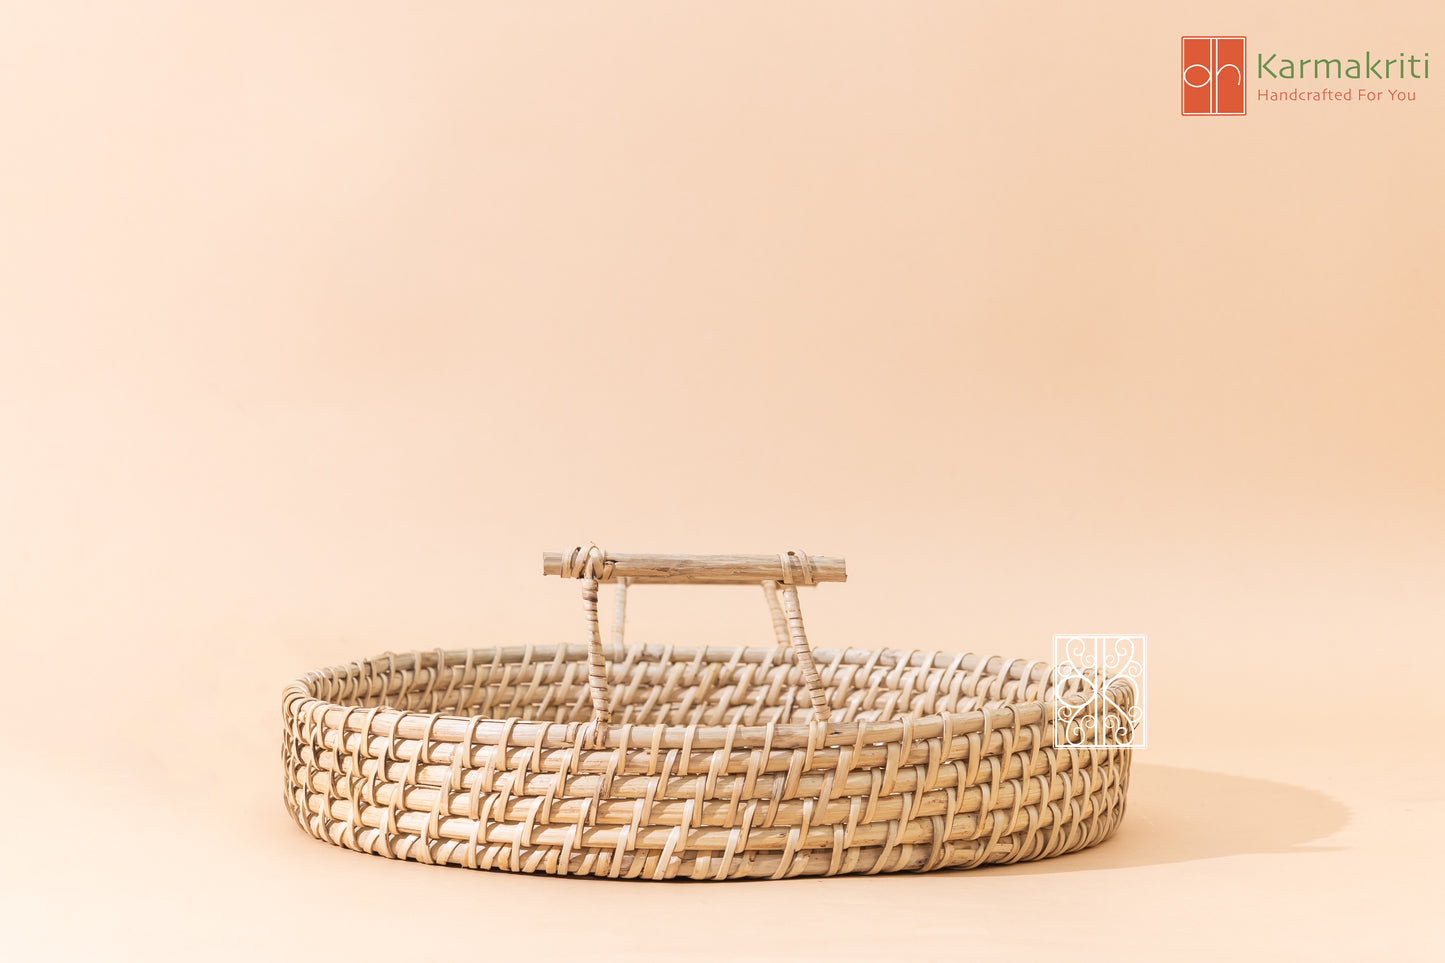 Sustainable Rattan Serving Tray